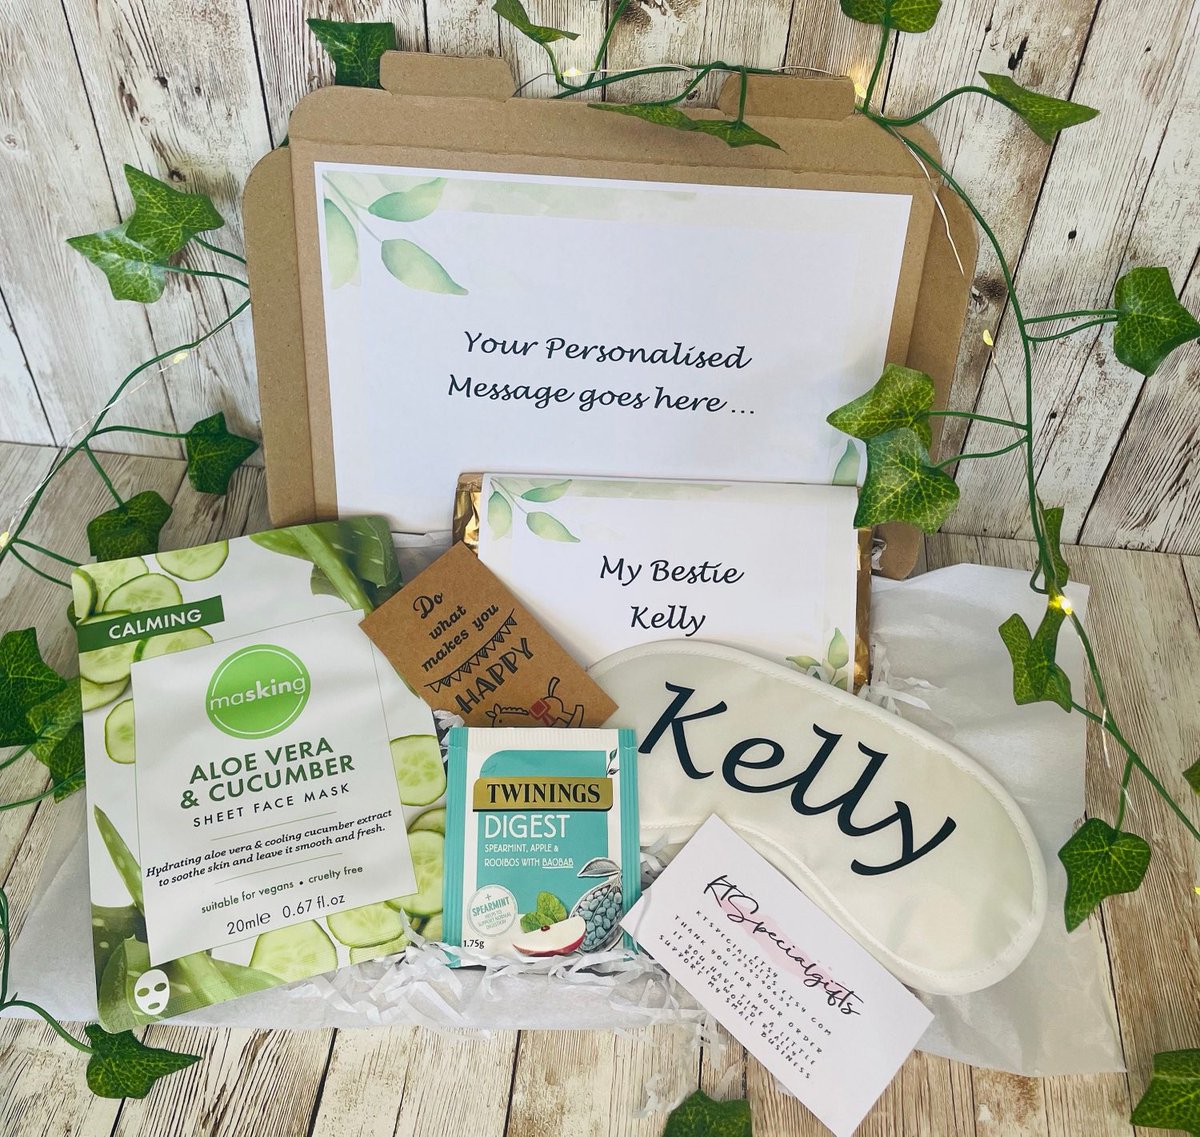 Personalised pamper hamper. Ideal for any occasion and ideal gift for her.

ktspecialgifts.etsy.com/listing/107007…

#pampergift #pamperhamper #soa #giftforher #birthday #recovery #gifts #personalised #wellness #selfcare #ukgiftam #earlybiz #etsy #etsystore #CraftBizParty #ukmakers #etsygifts